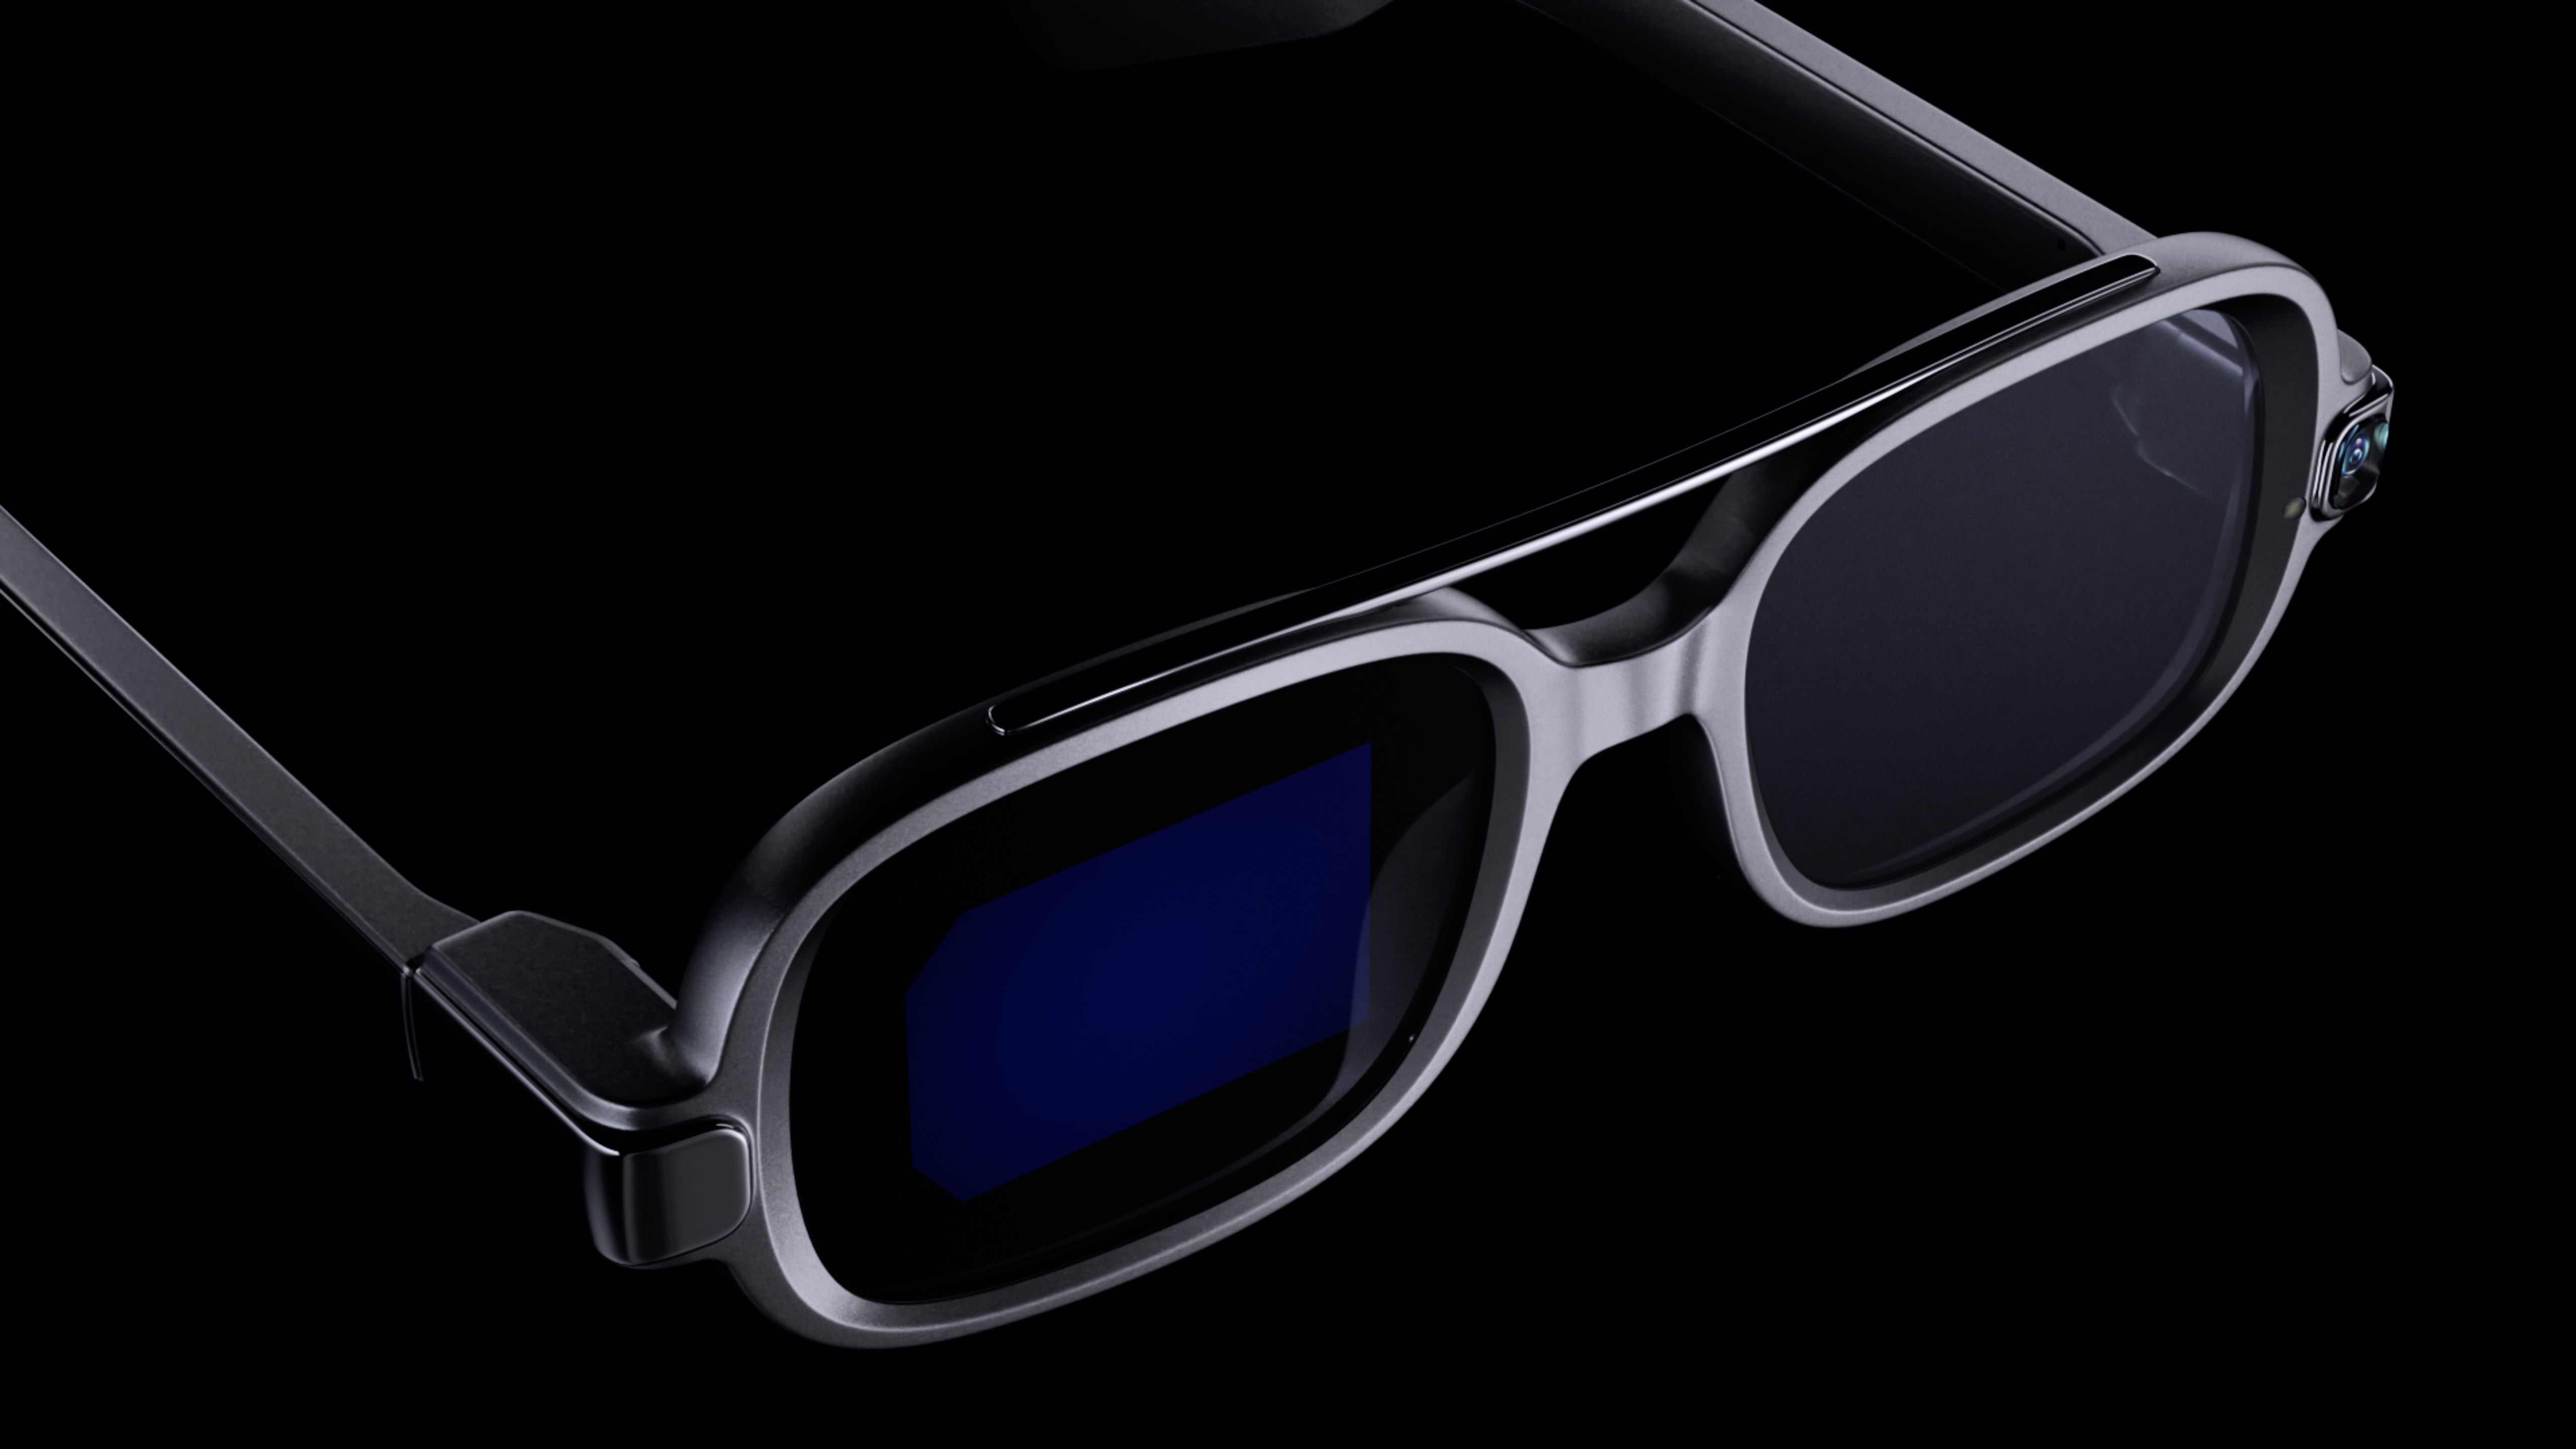 Xiaomi Smart Glasses Revealed Microled Display Brings True Ar Into Focus Laptop Mag